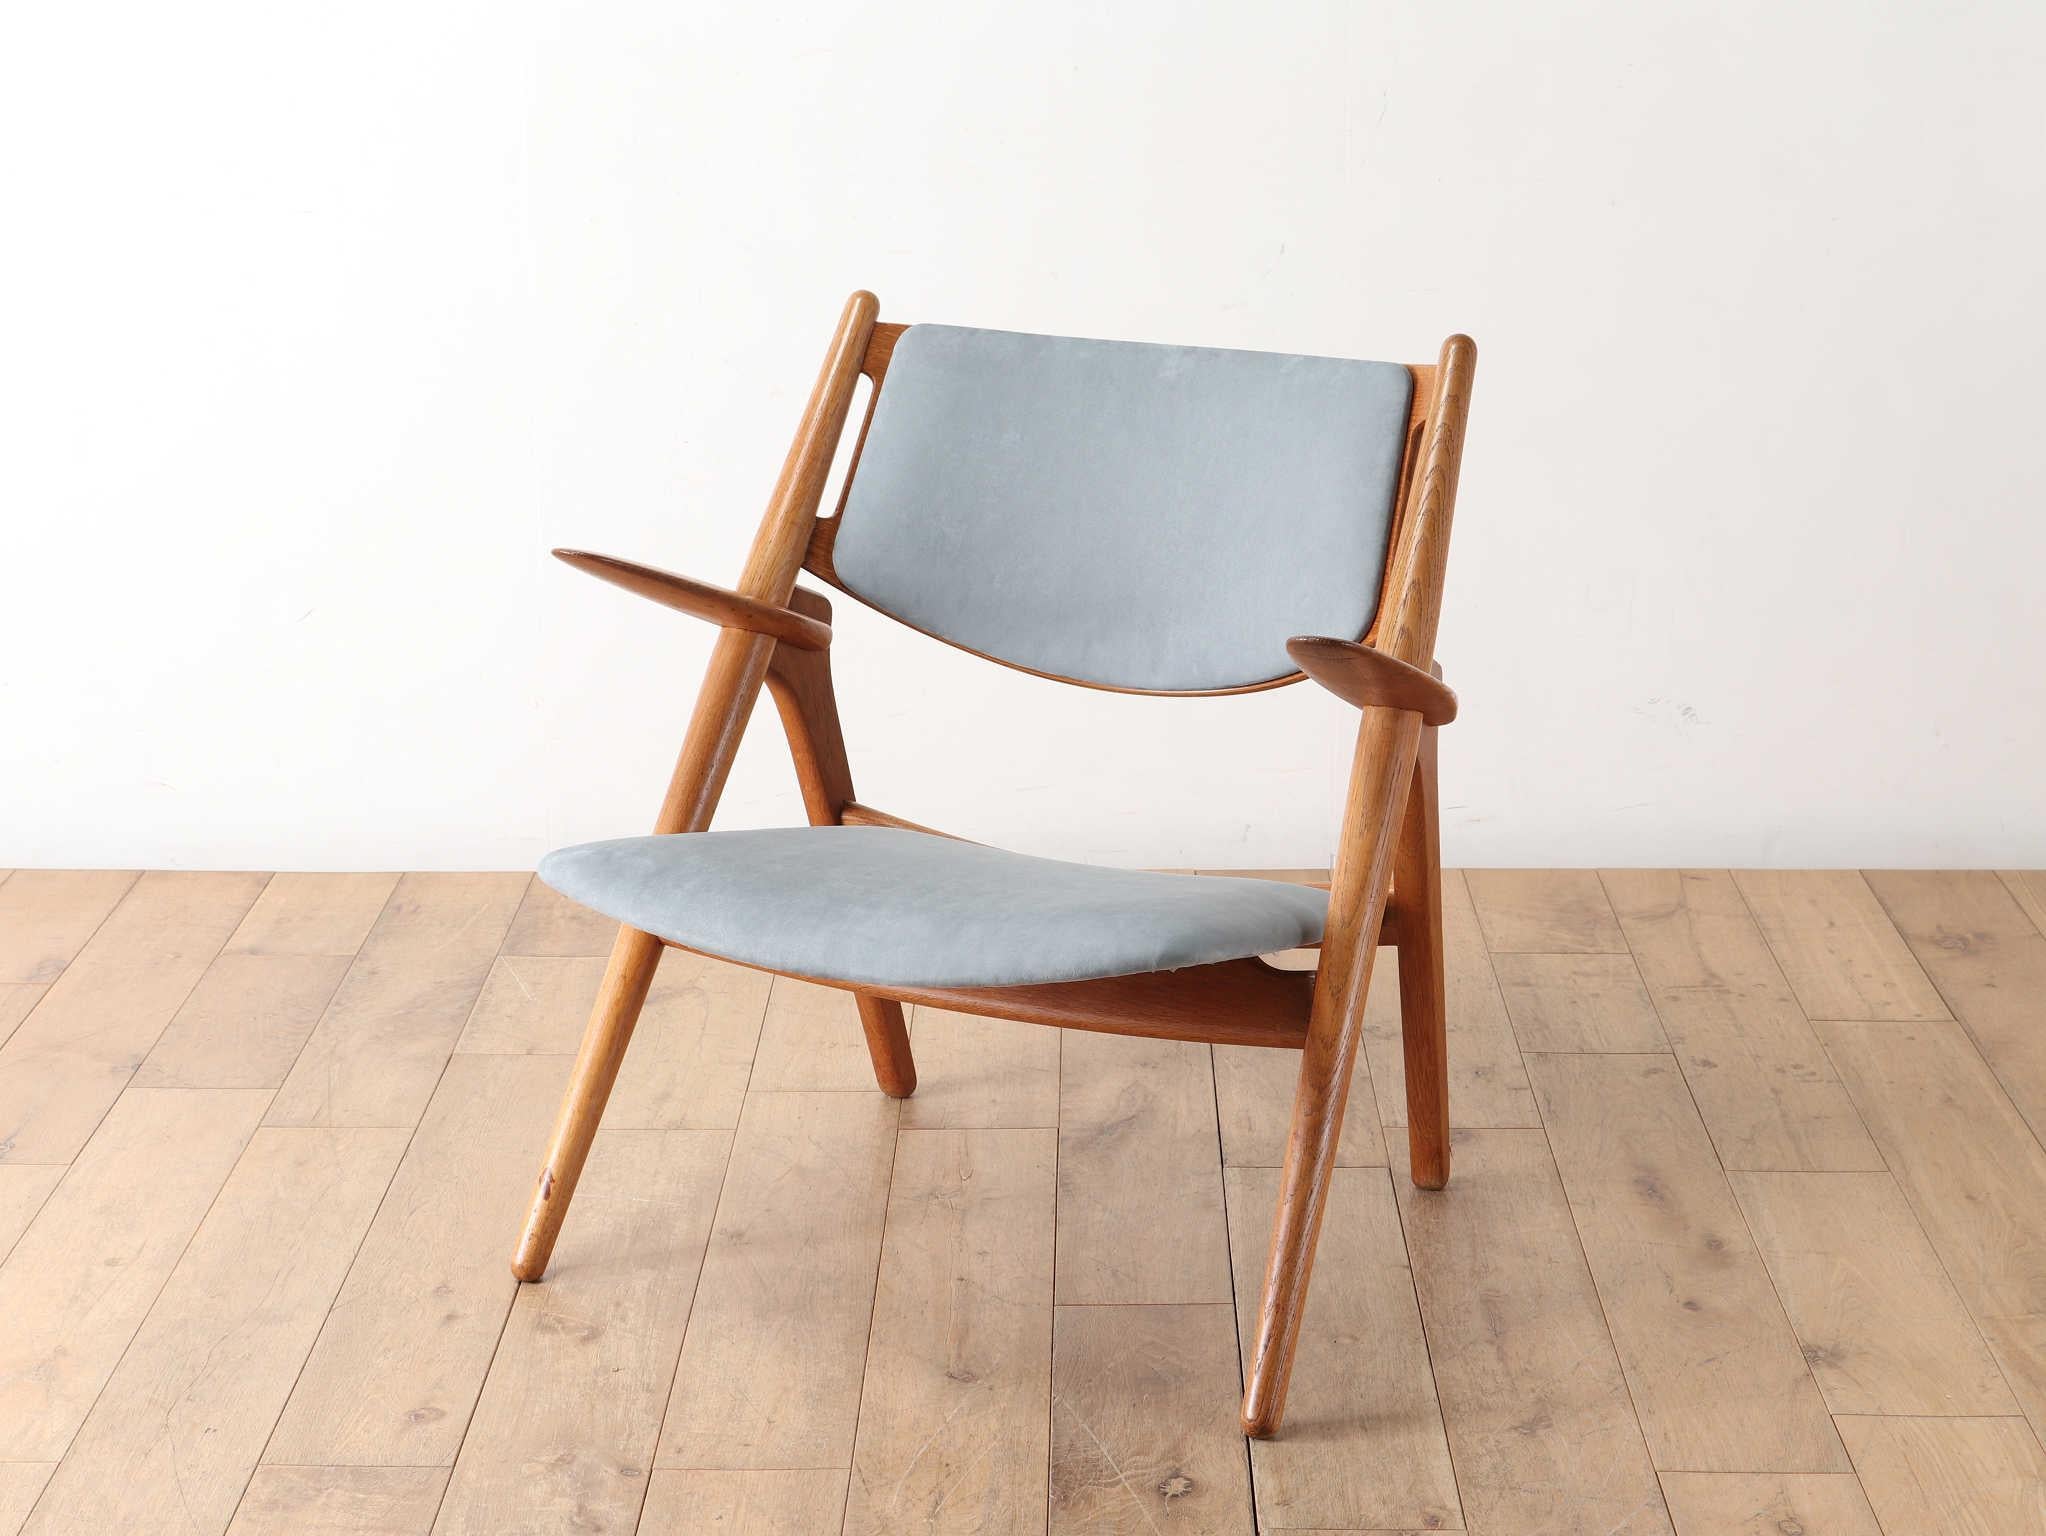 SAWBUCK CHAIR CH28, designed in 1951 by the Danish master Hans J. Wegner and produced by Carl Hansen & Søn. A wonderfully comfortable chair that shows the perfect balance between striking form and function in Hans J.  Wegner's unique pursuit of